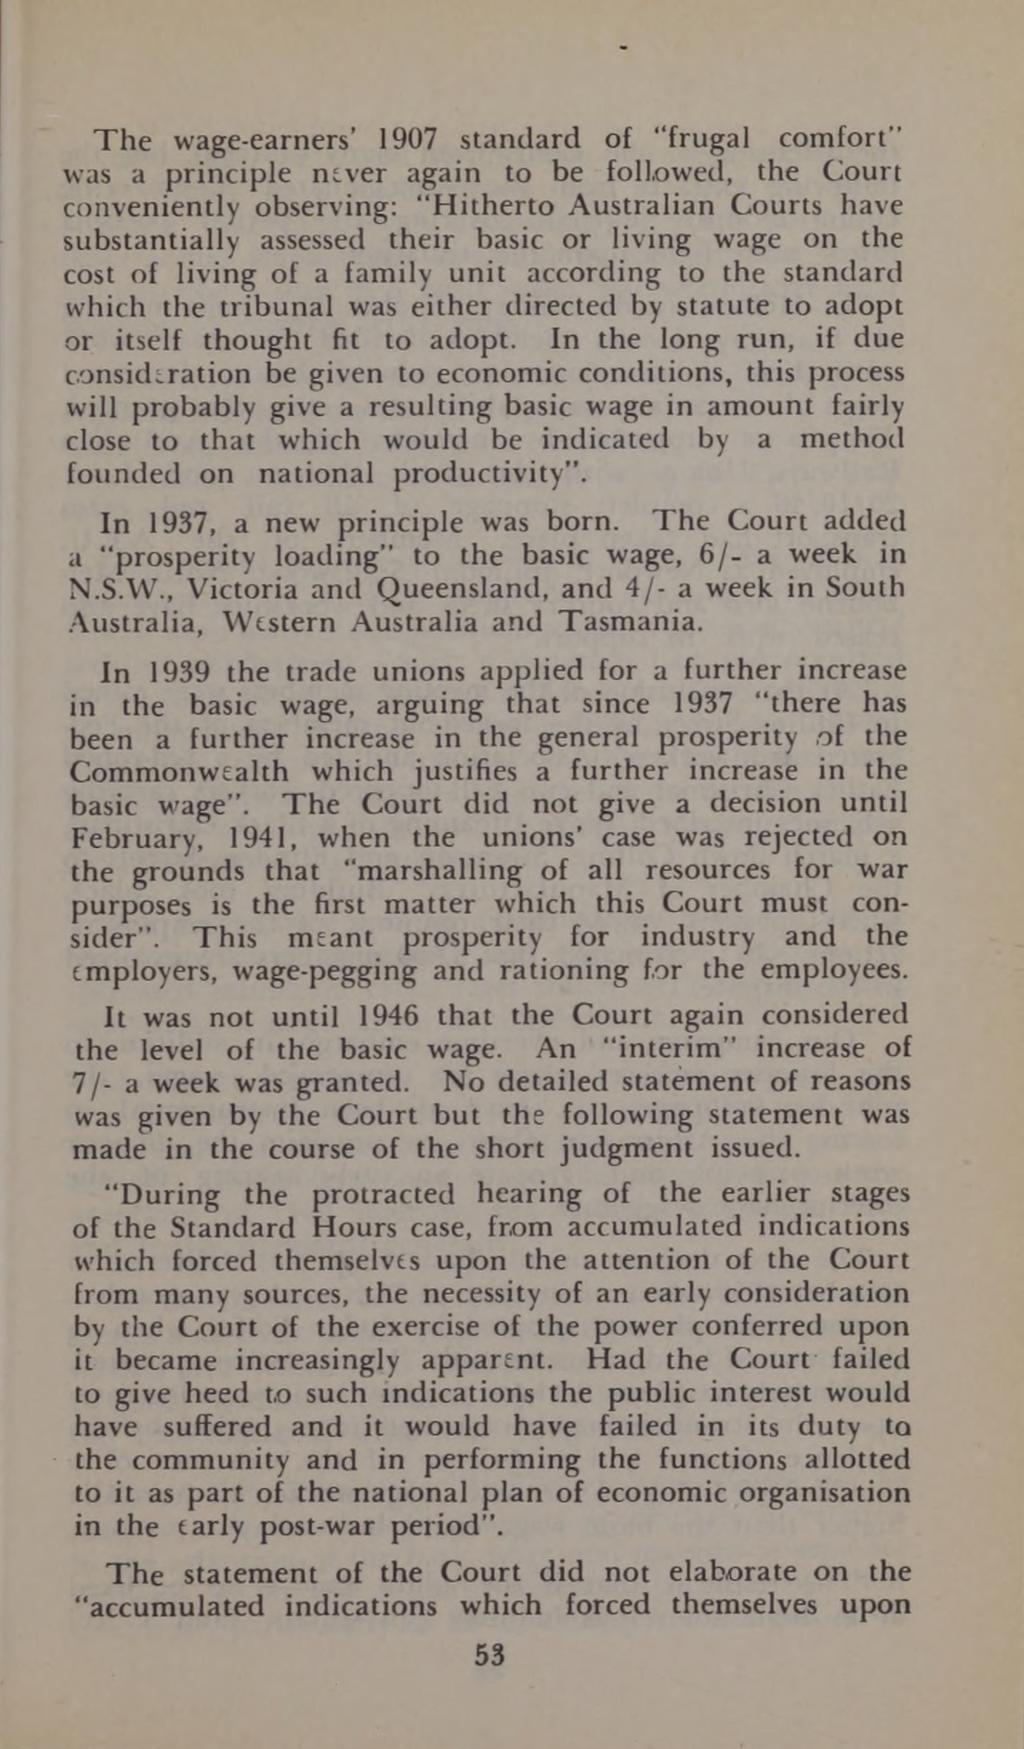 The wage-earners 1907 standard of frugal comfort" was a principle never again to be followed, the Court conveniently observing: Hitherto Australian Courts have substantially assessed their basic or